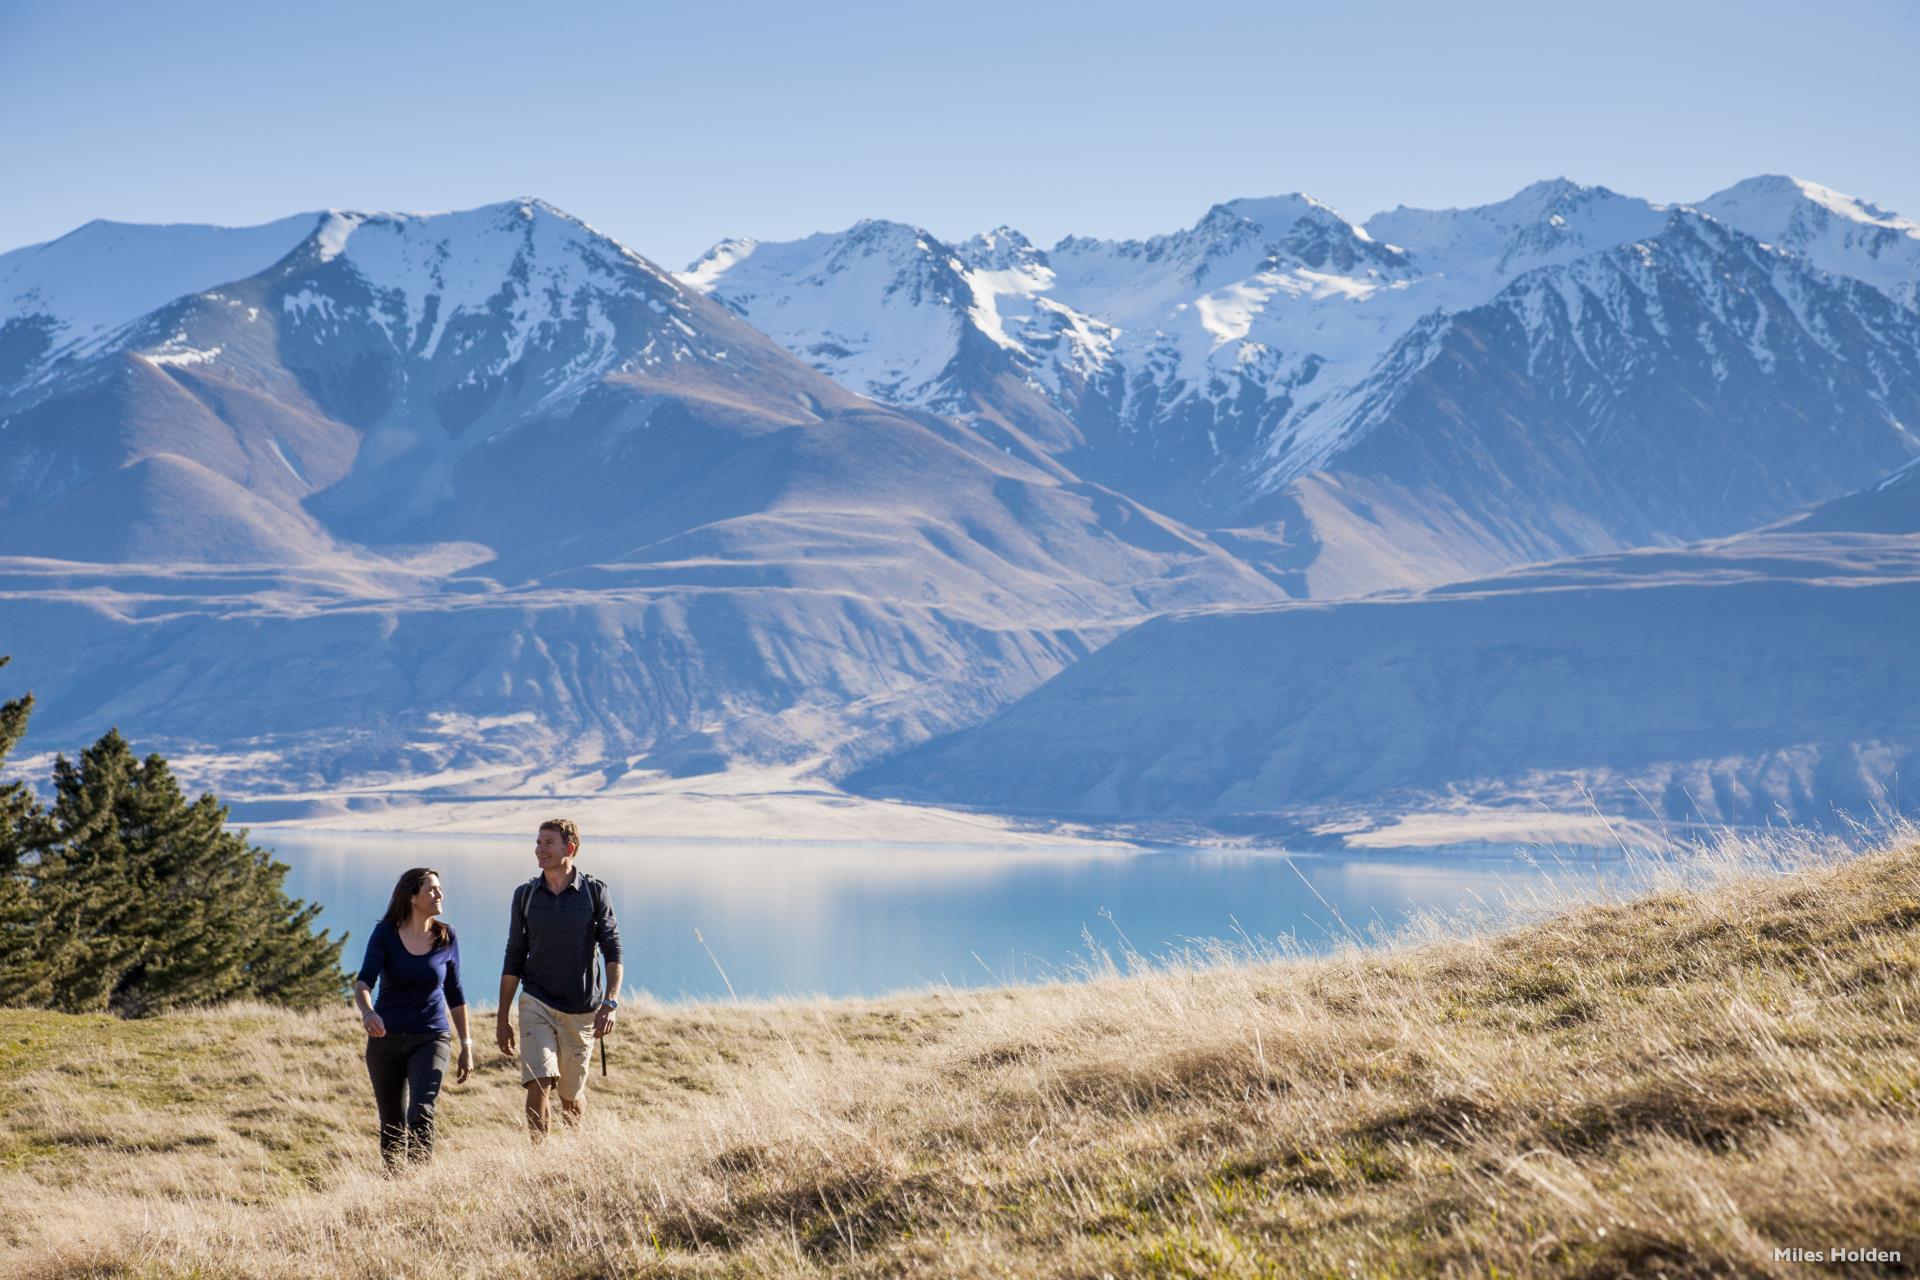 Hiking  - New Zealand's Great Outdoors